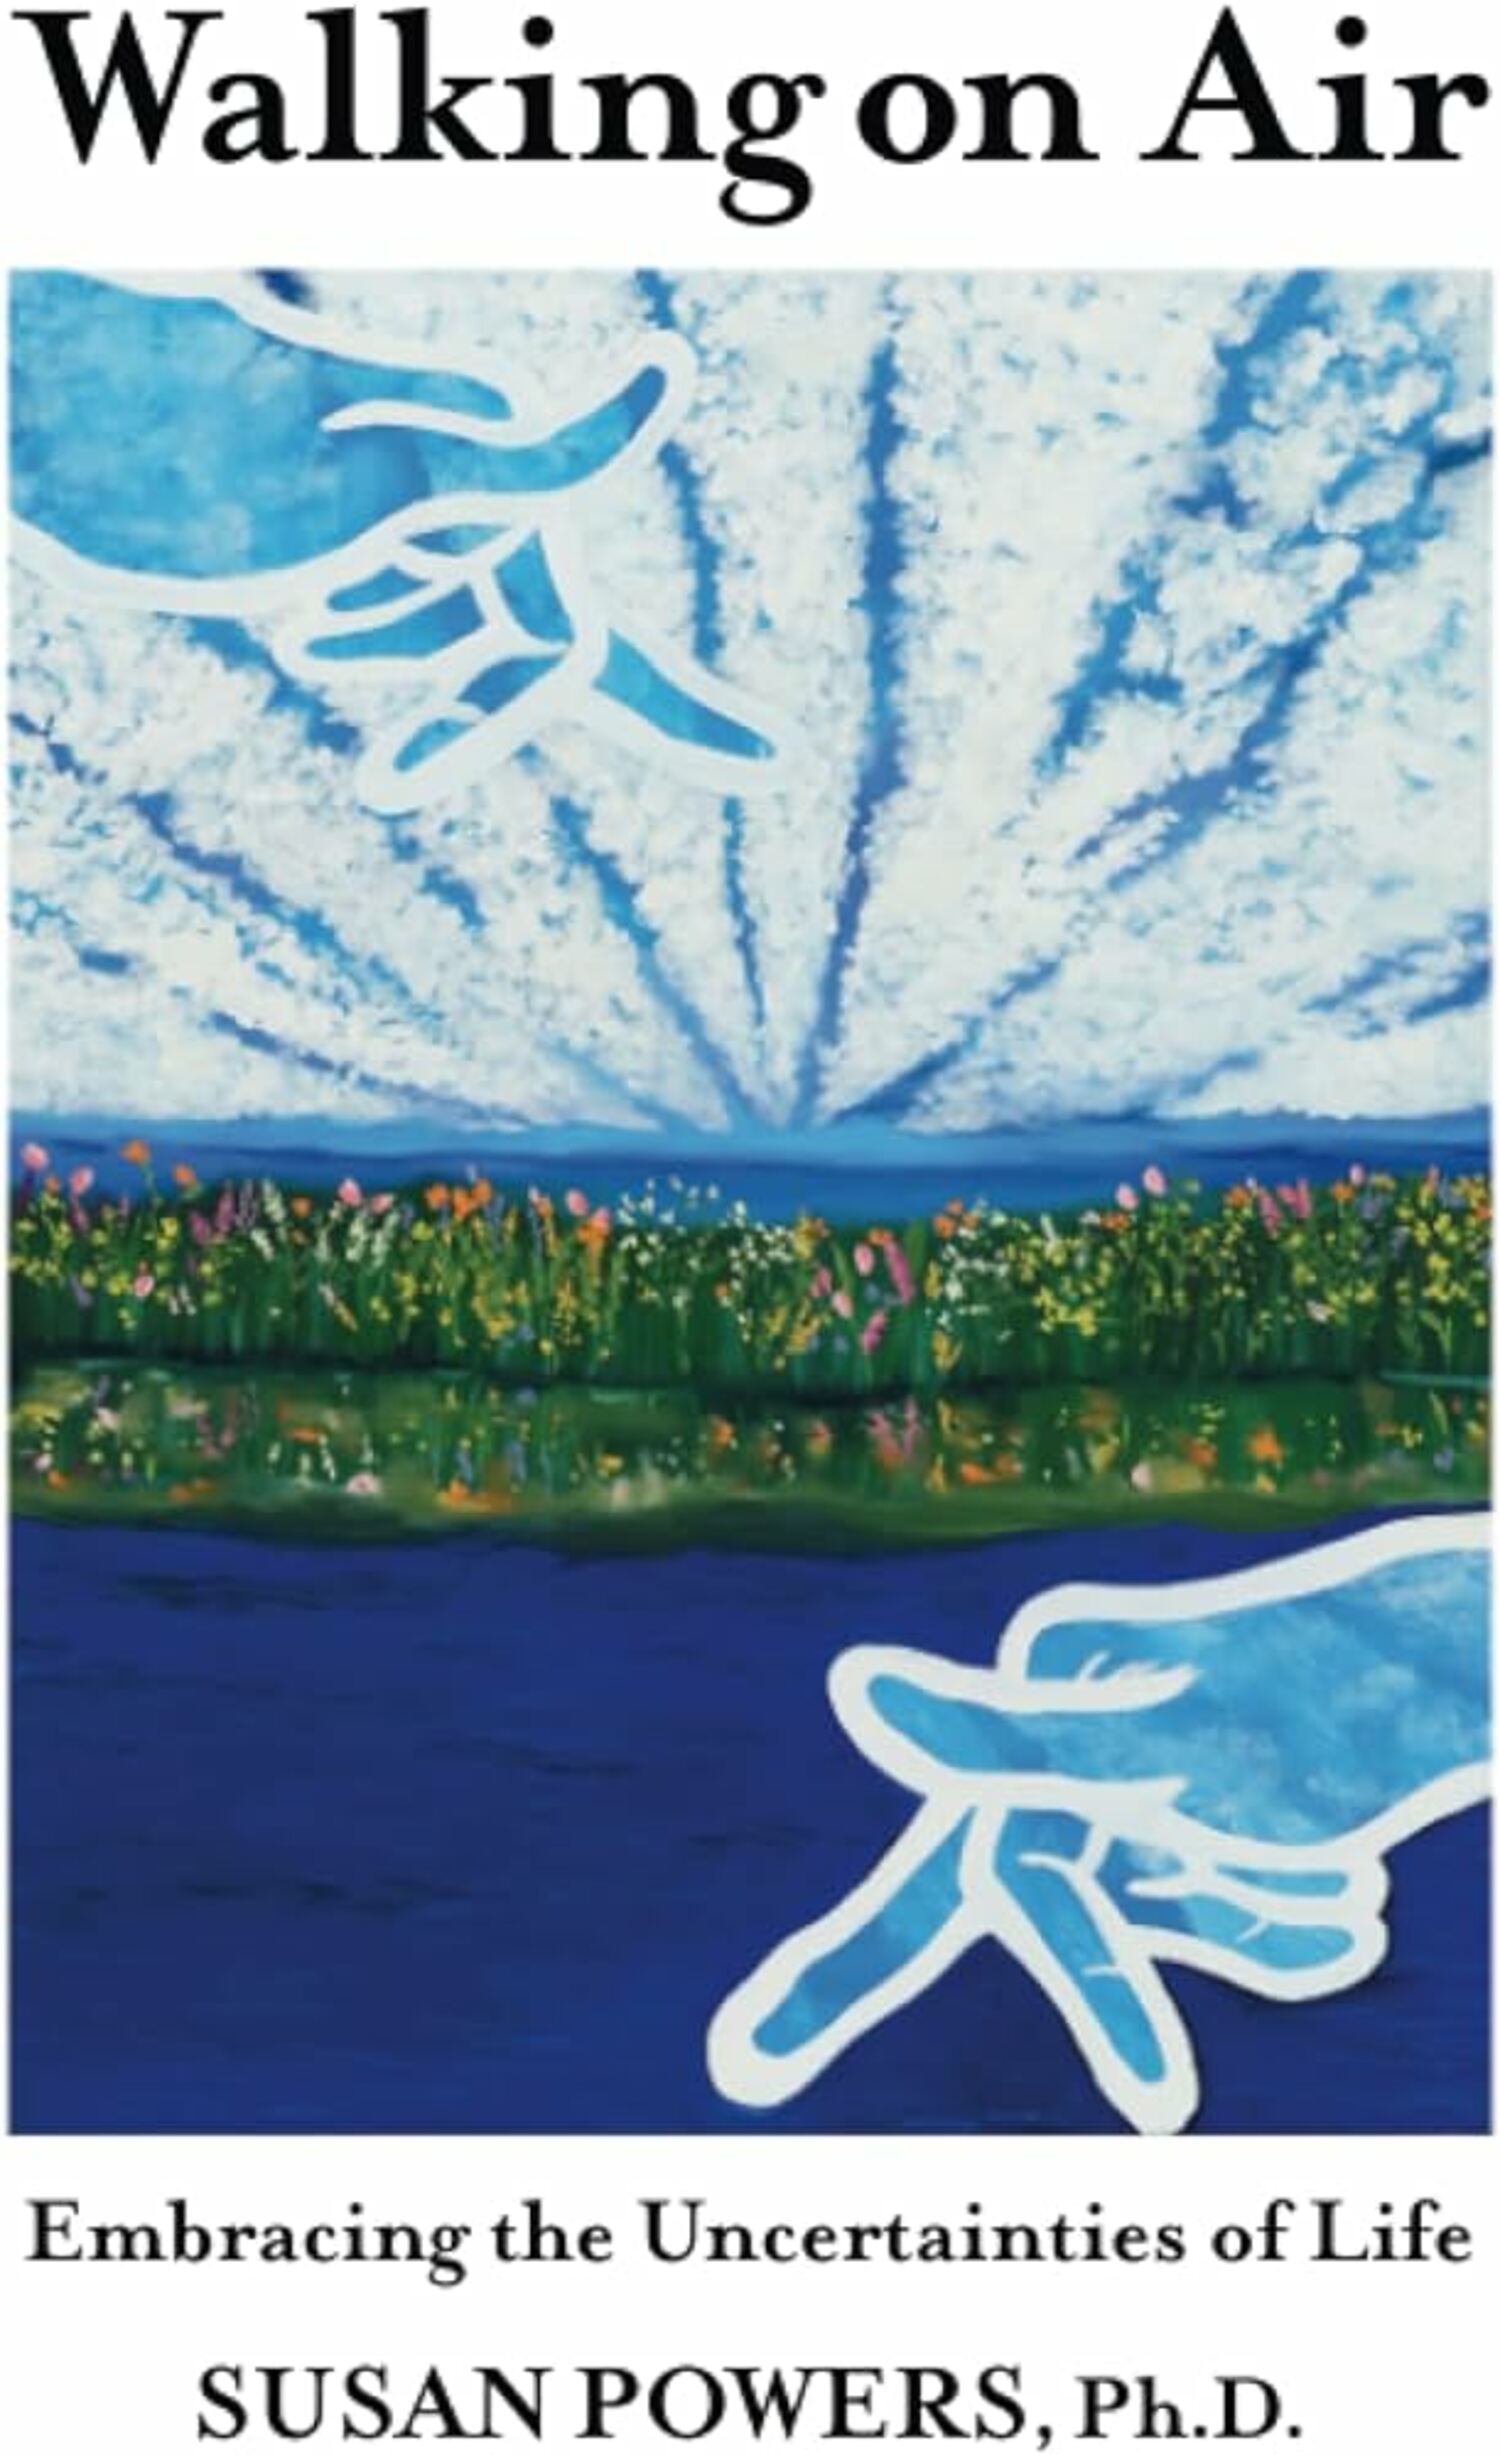 The cover of “Walking on Air: Embracing the Uncertainties of Life” by Susan Powers.